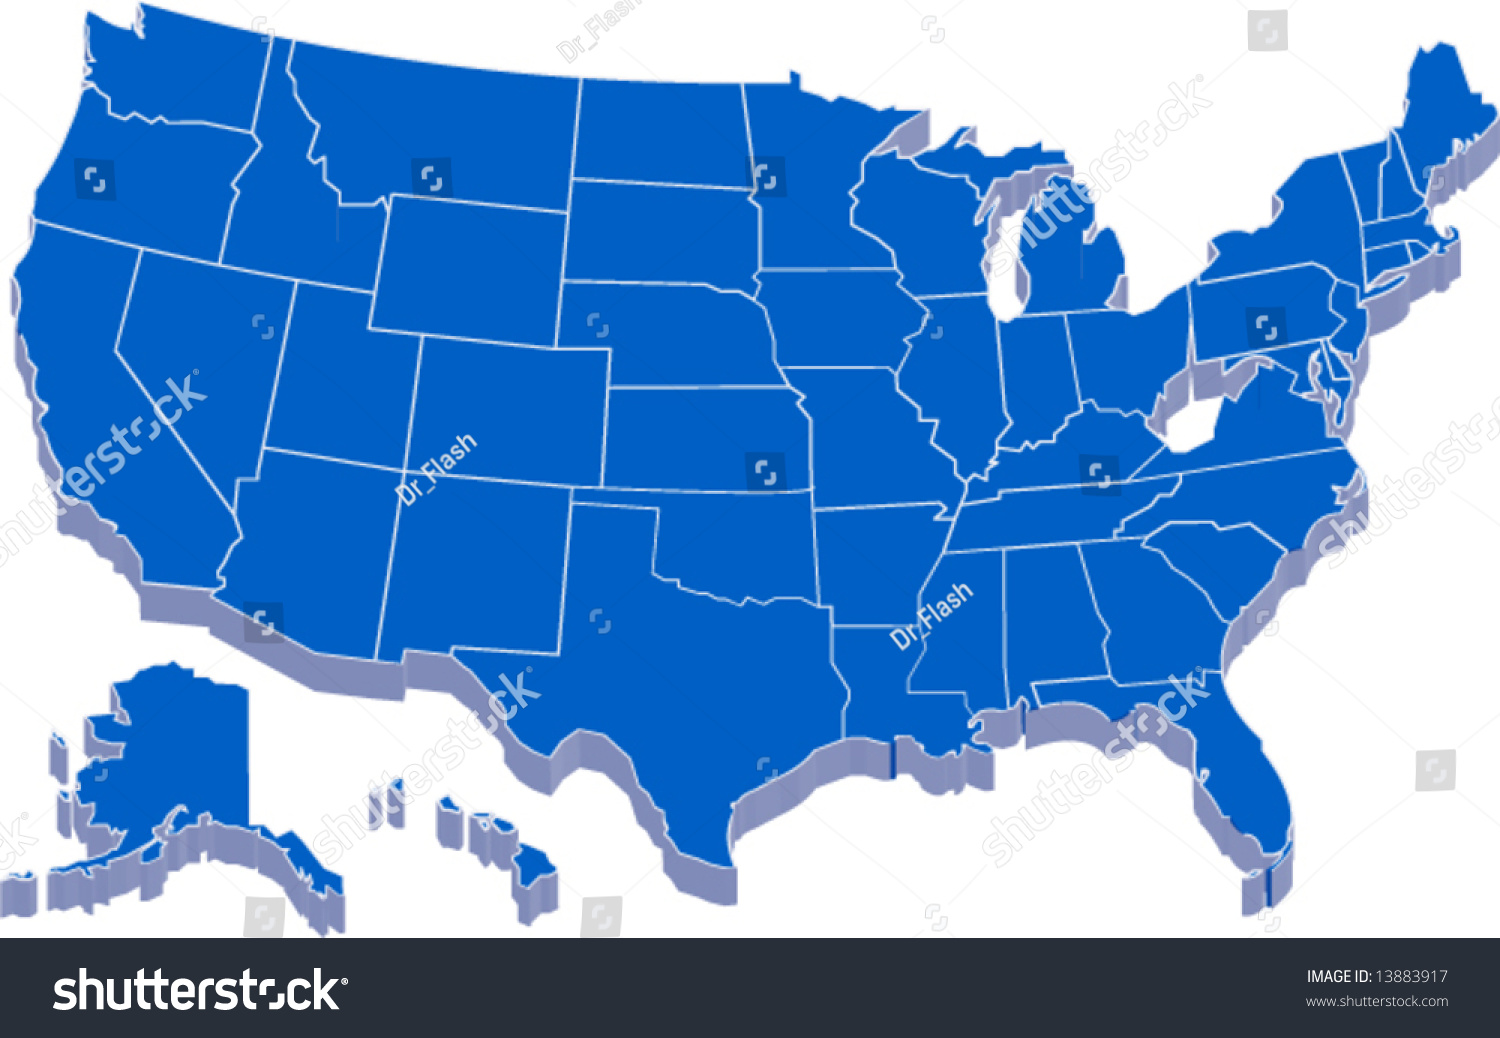 United States America Map 3d Vector Stock Vector Royalty Free